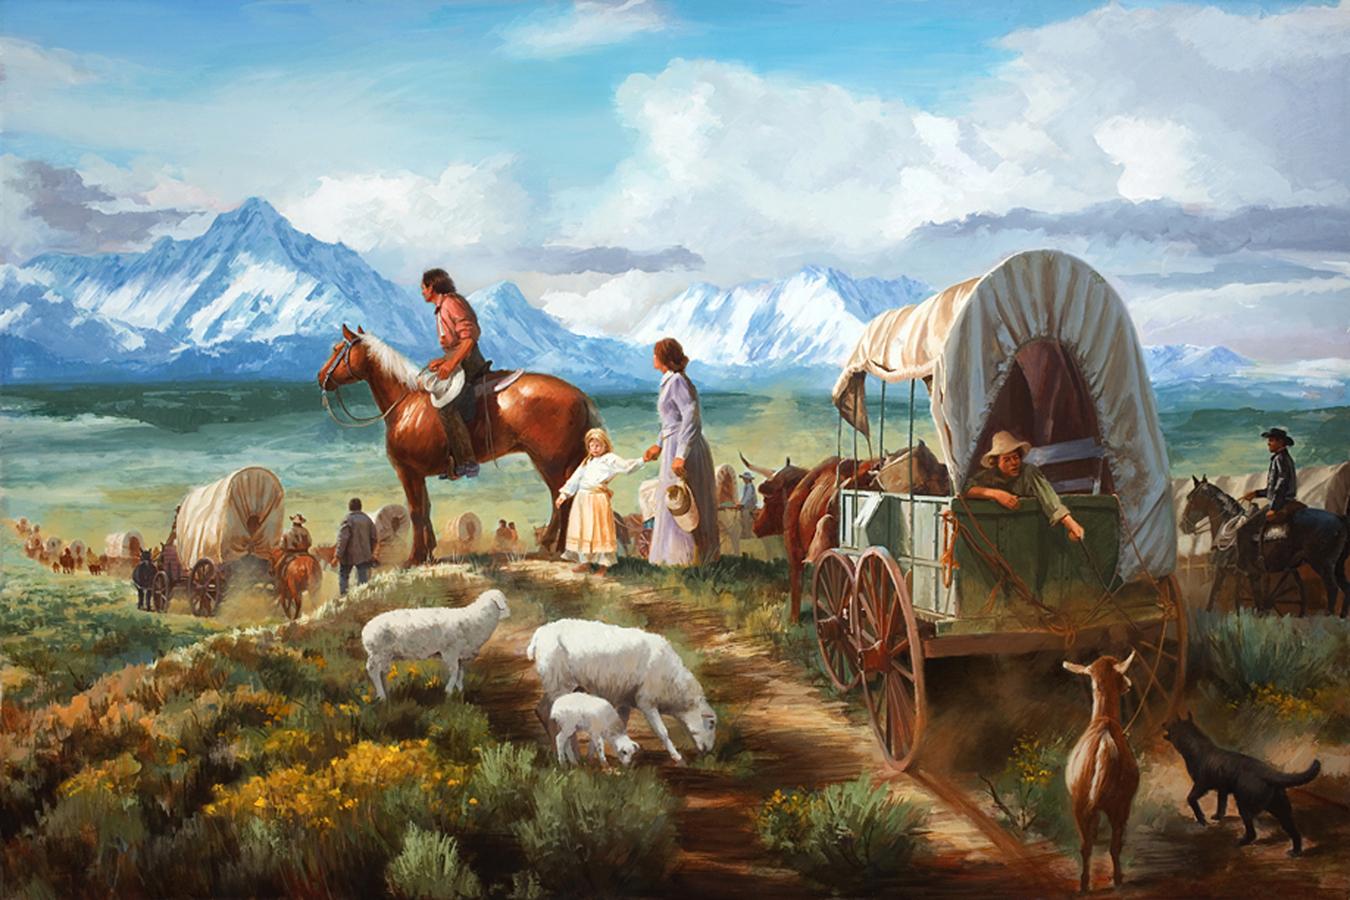 The Oregon Trail Wallpapers